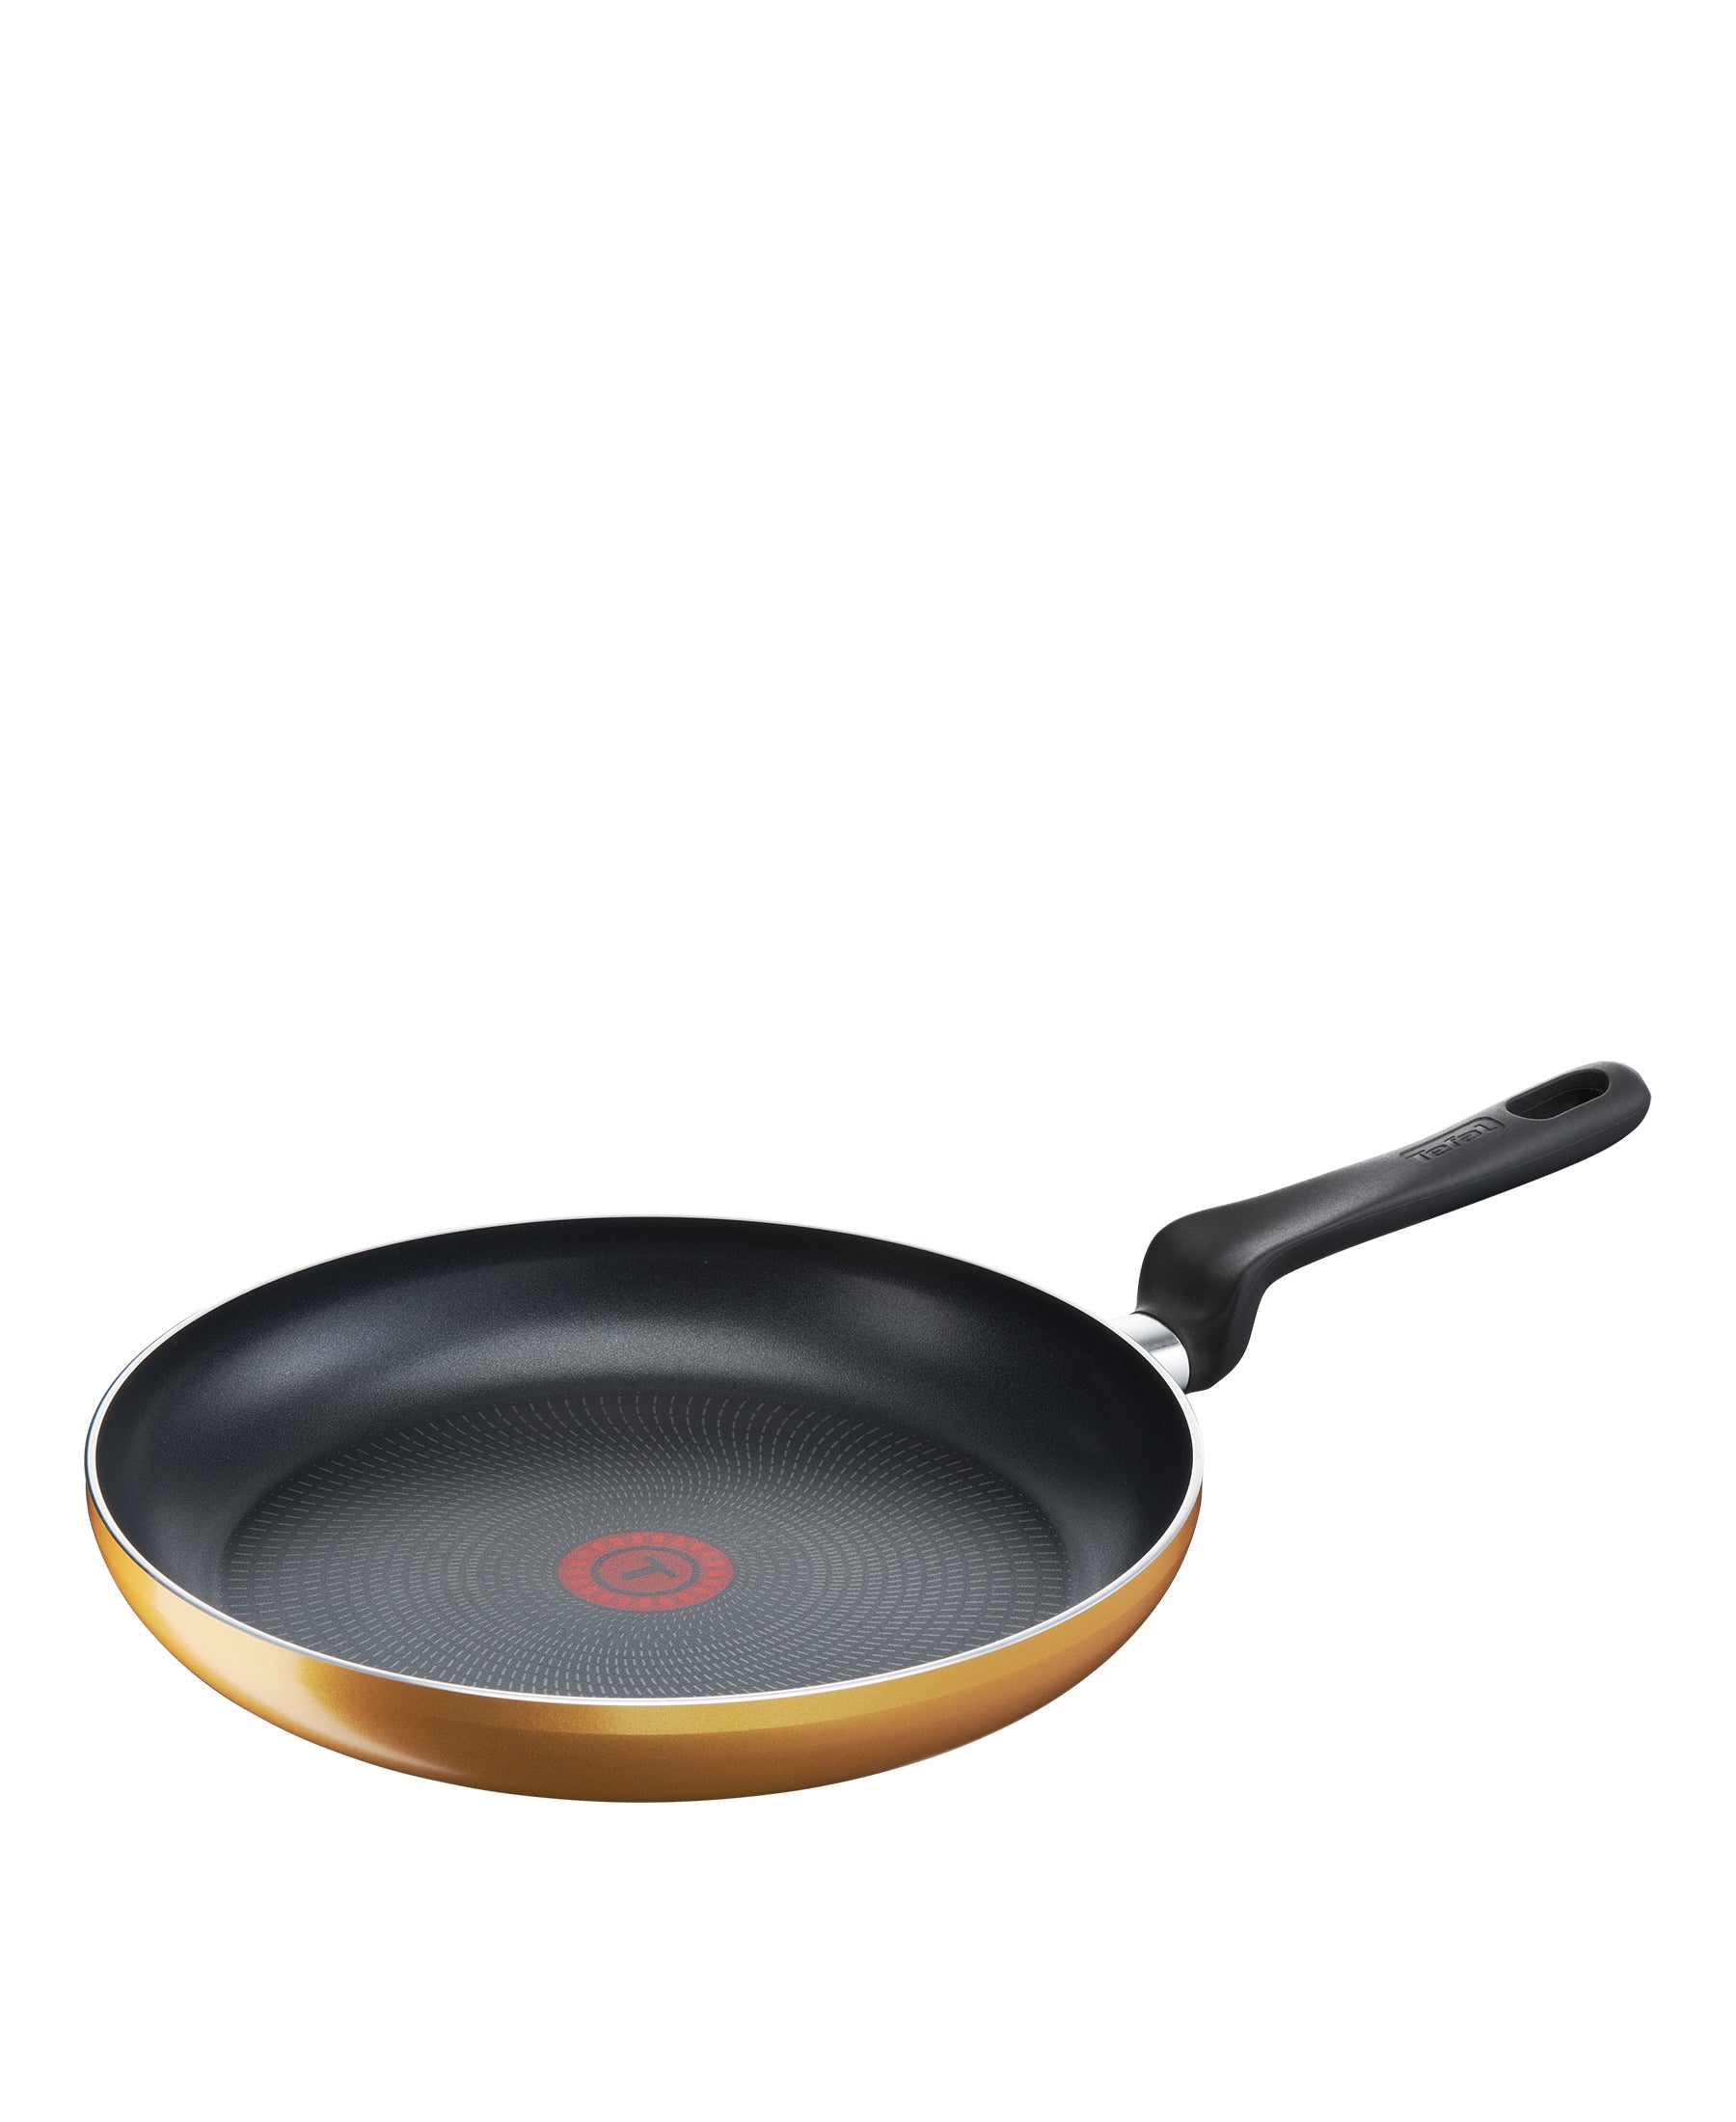 Tefal Star Collection 28cm Fryfan - Gold